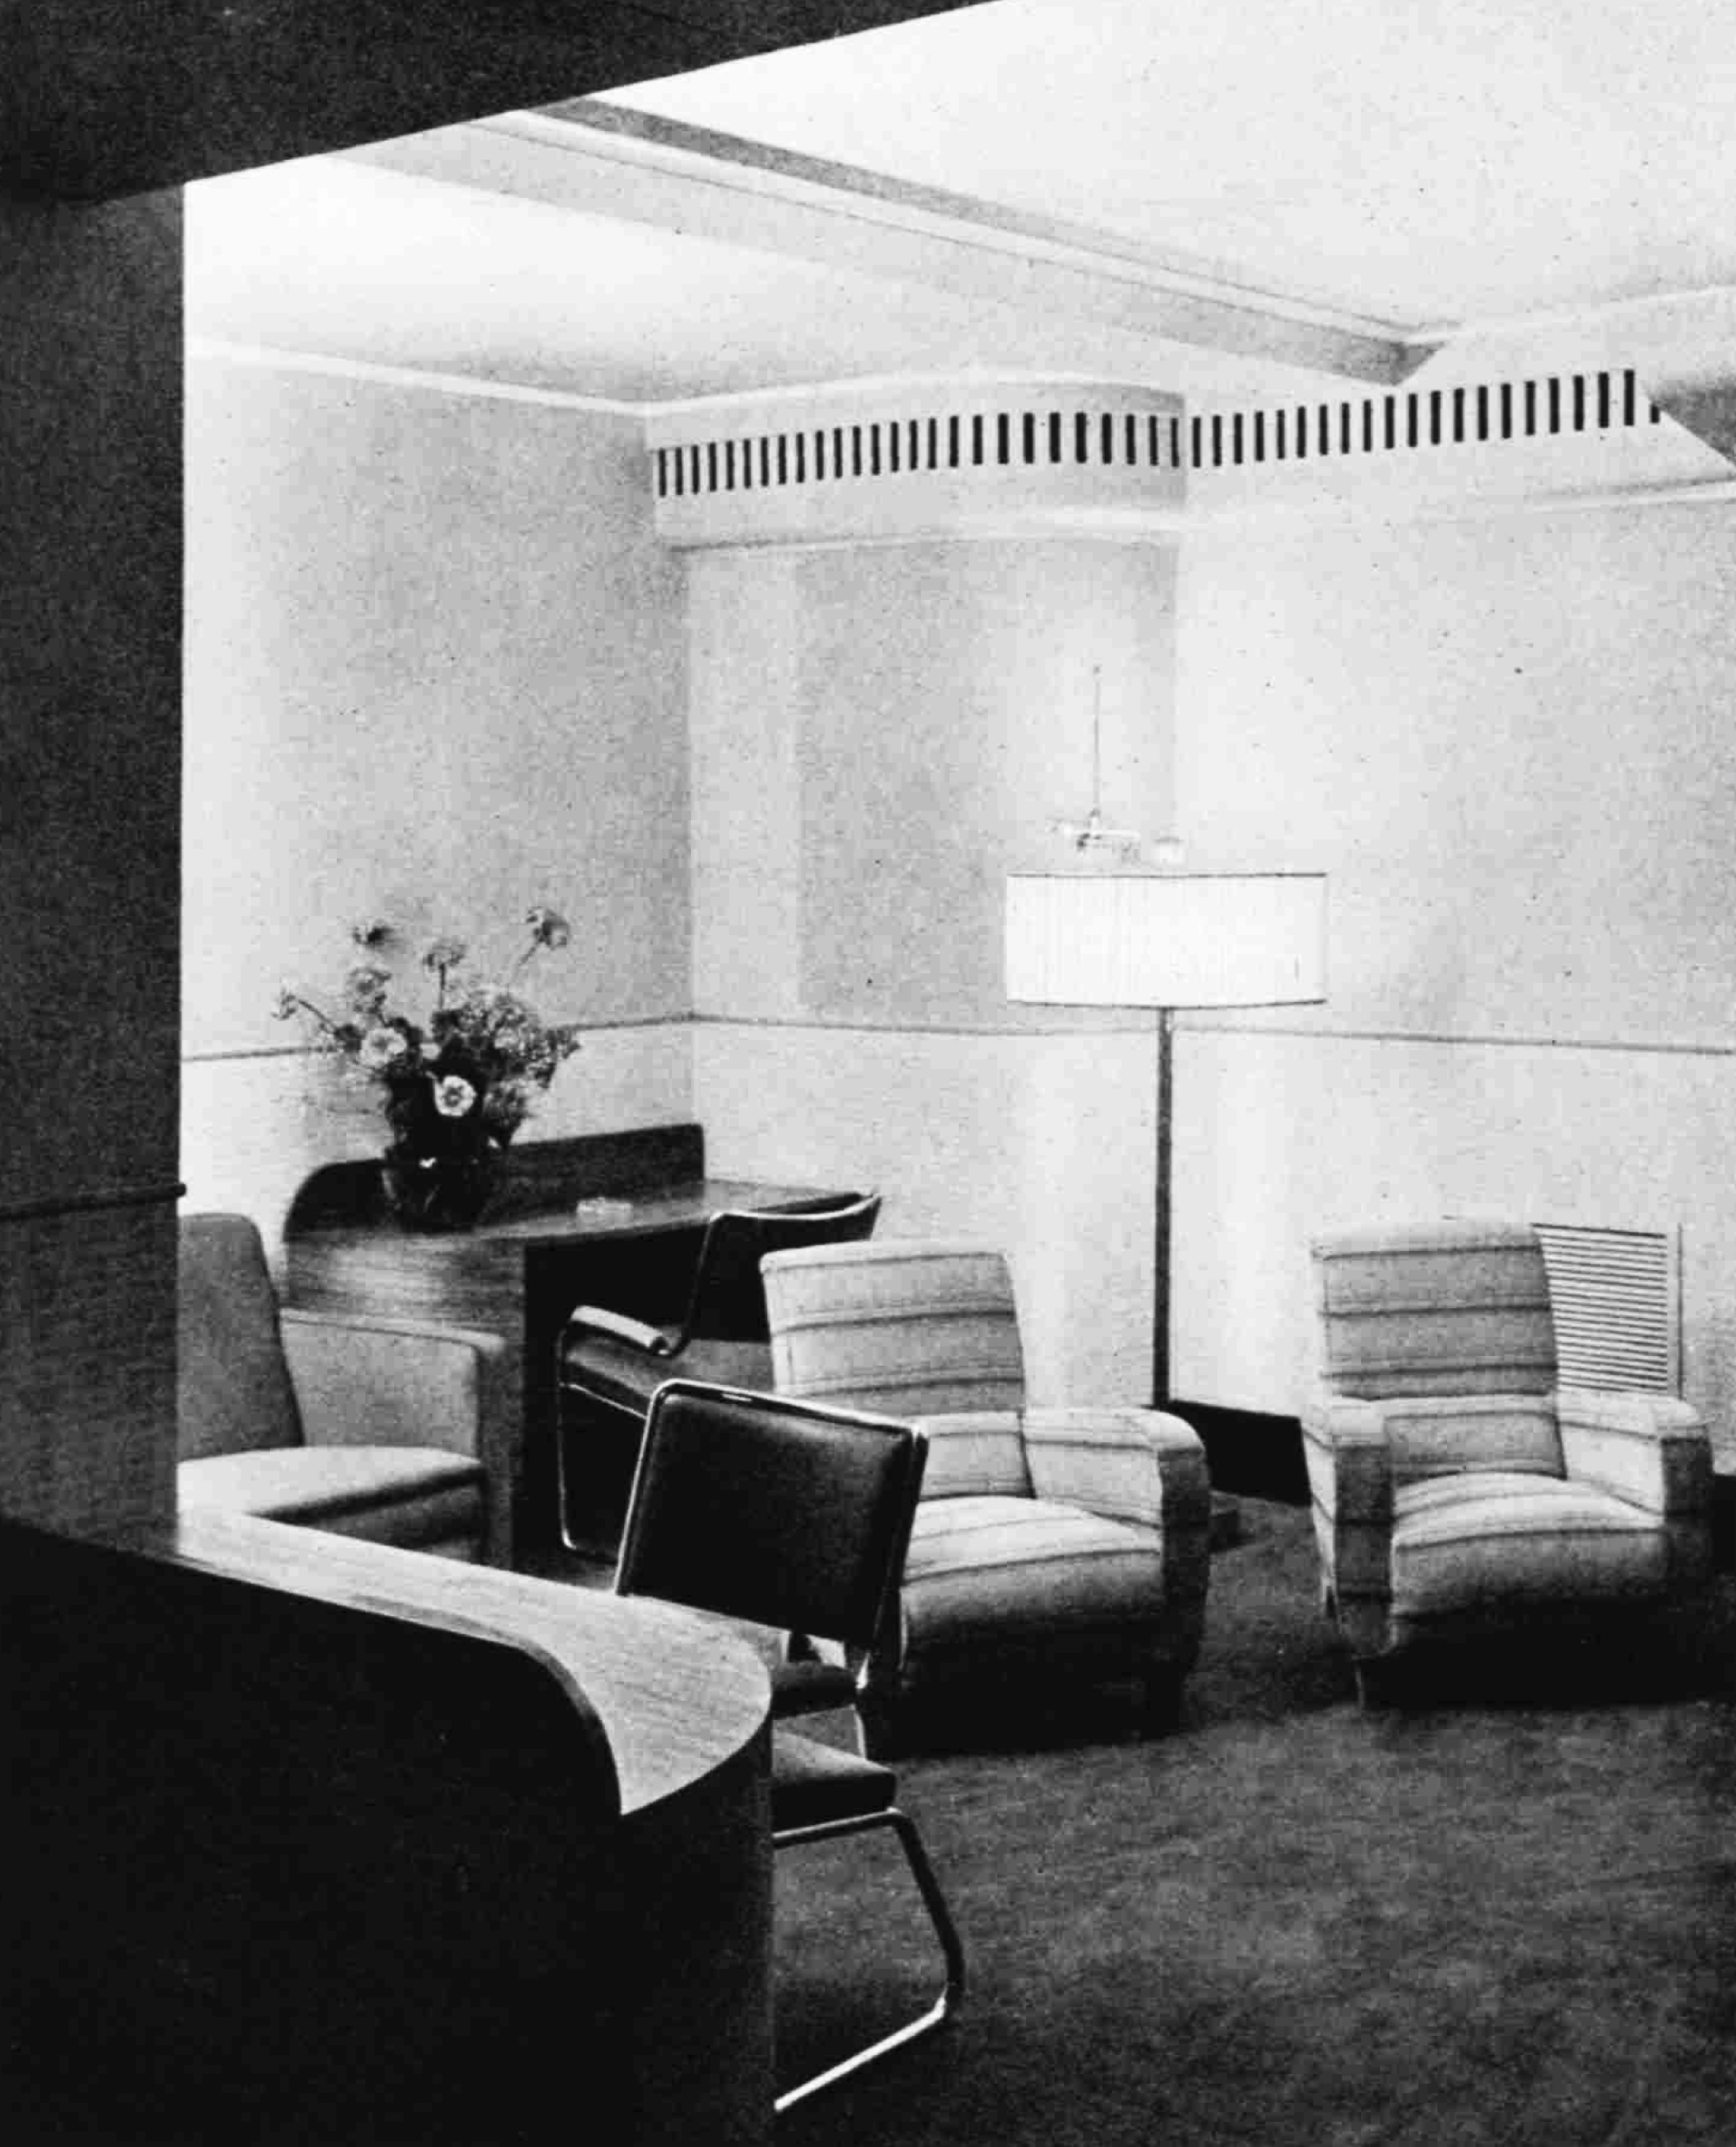 Comfortable chairs and a standard lamp